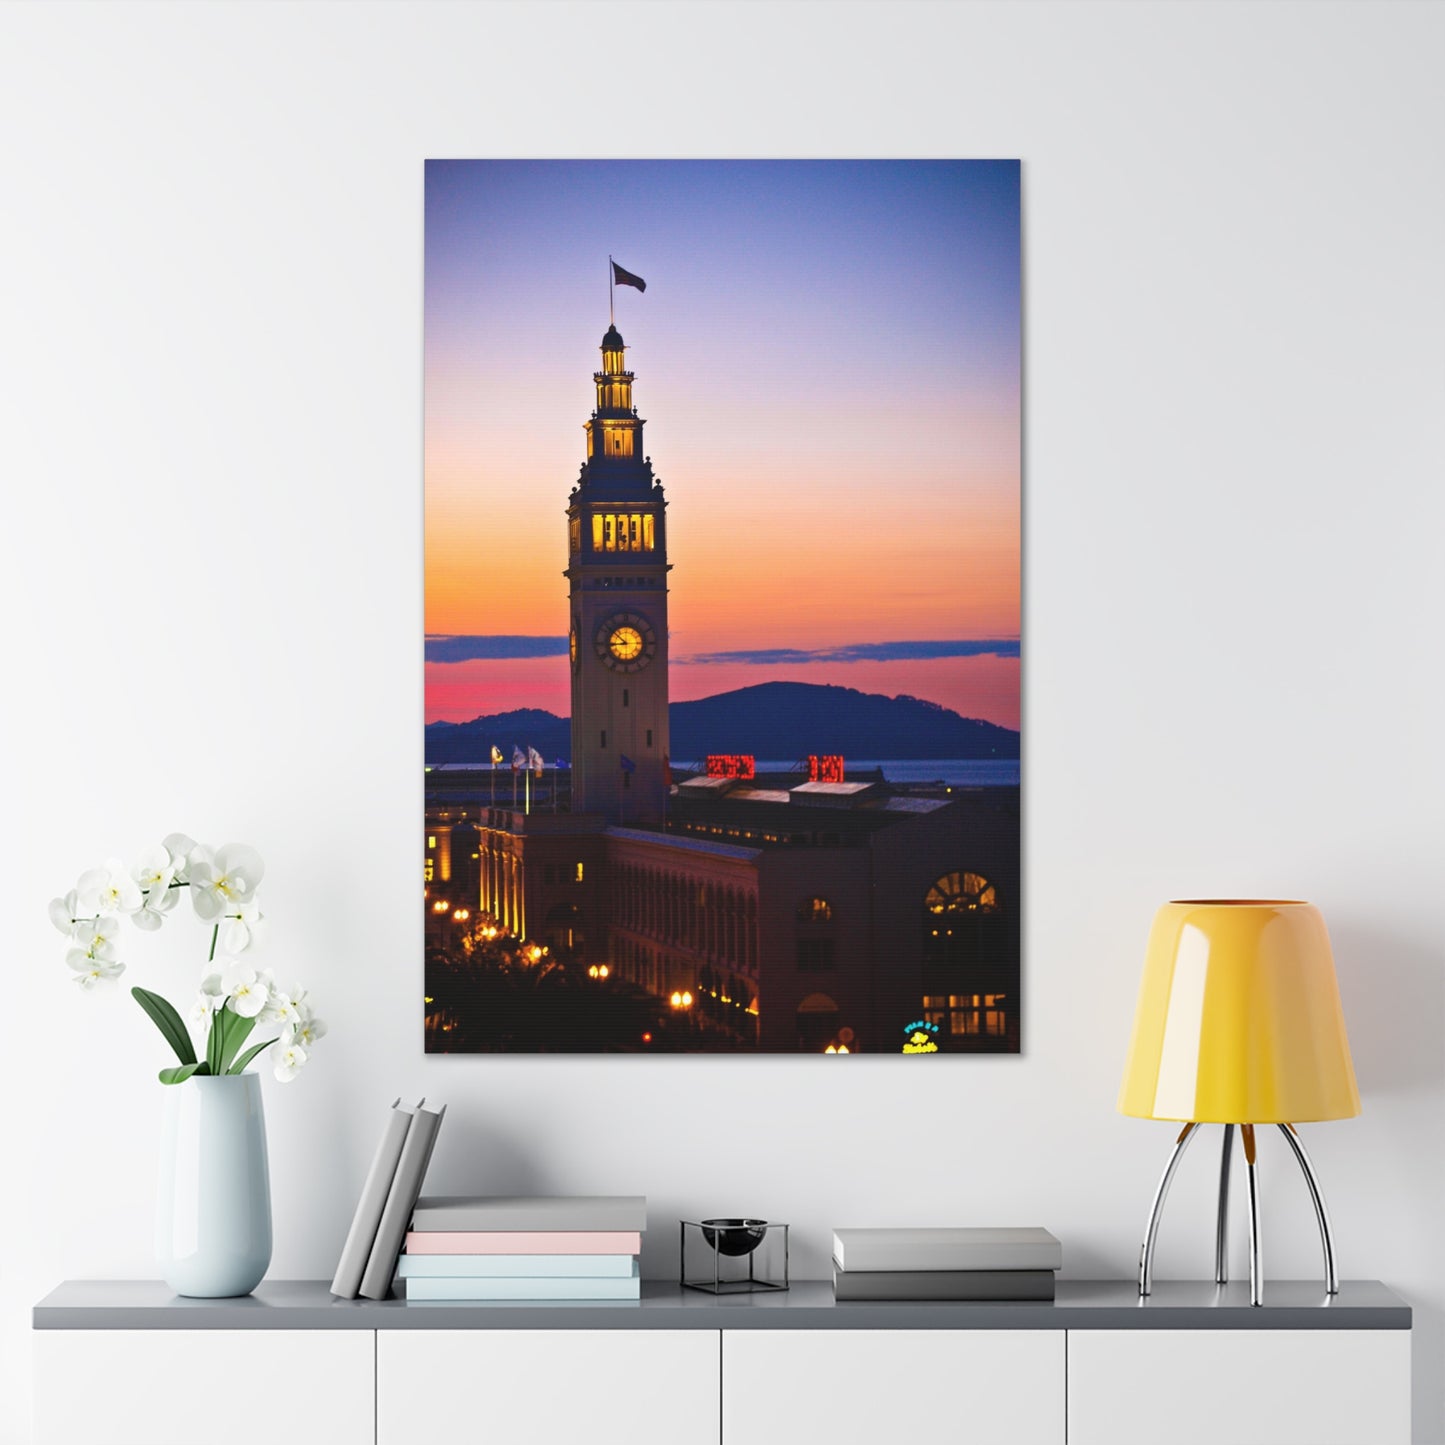 Canvas Print Of The Ferry Building On Embarcadero In San Francisco For Wall Art